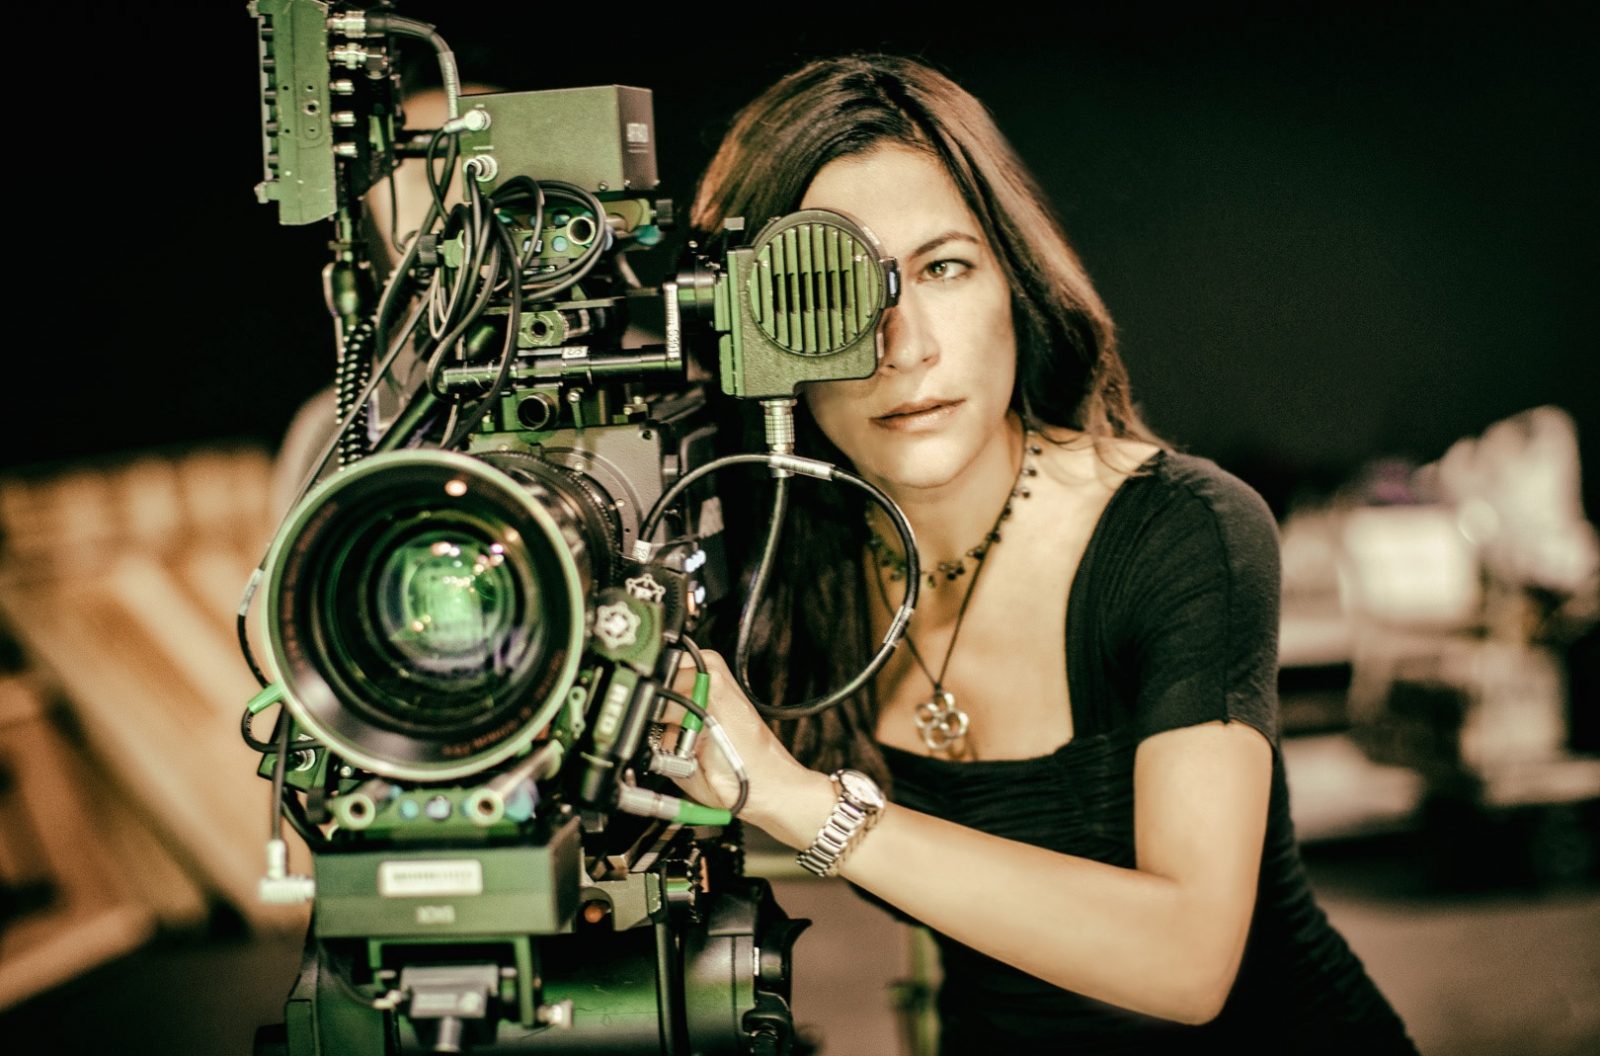 STORY BROADS: Television Director Vanessa Parise on What it Takes to Make It